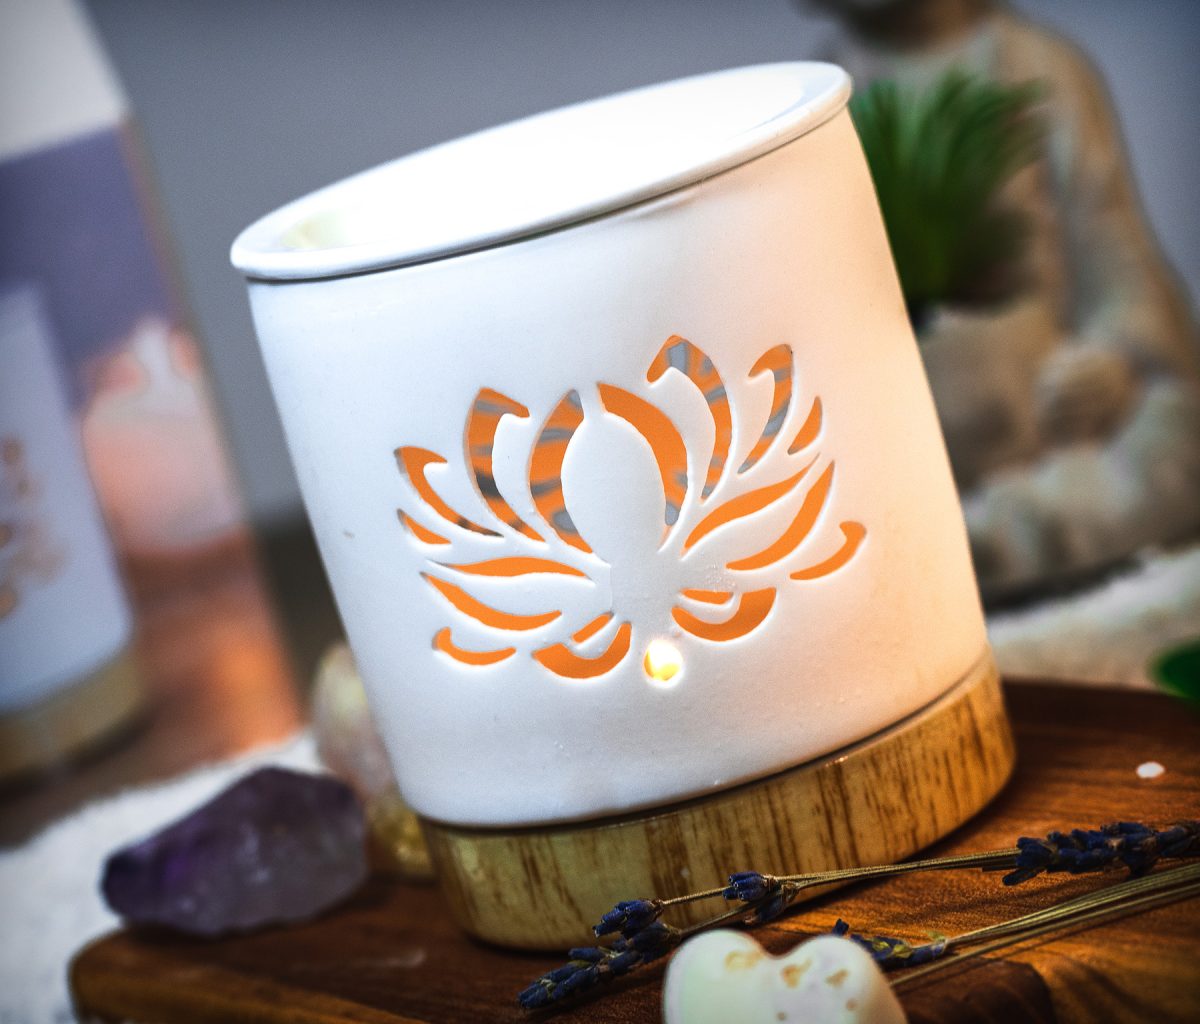 White lotus cut-out ceramic oil burner for scented wax melts